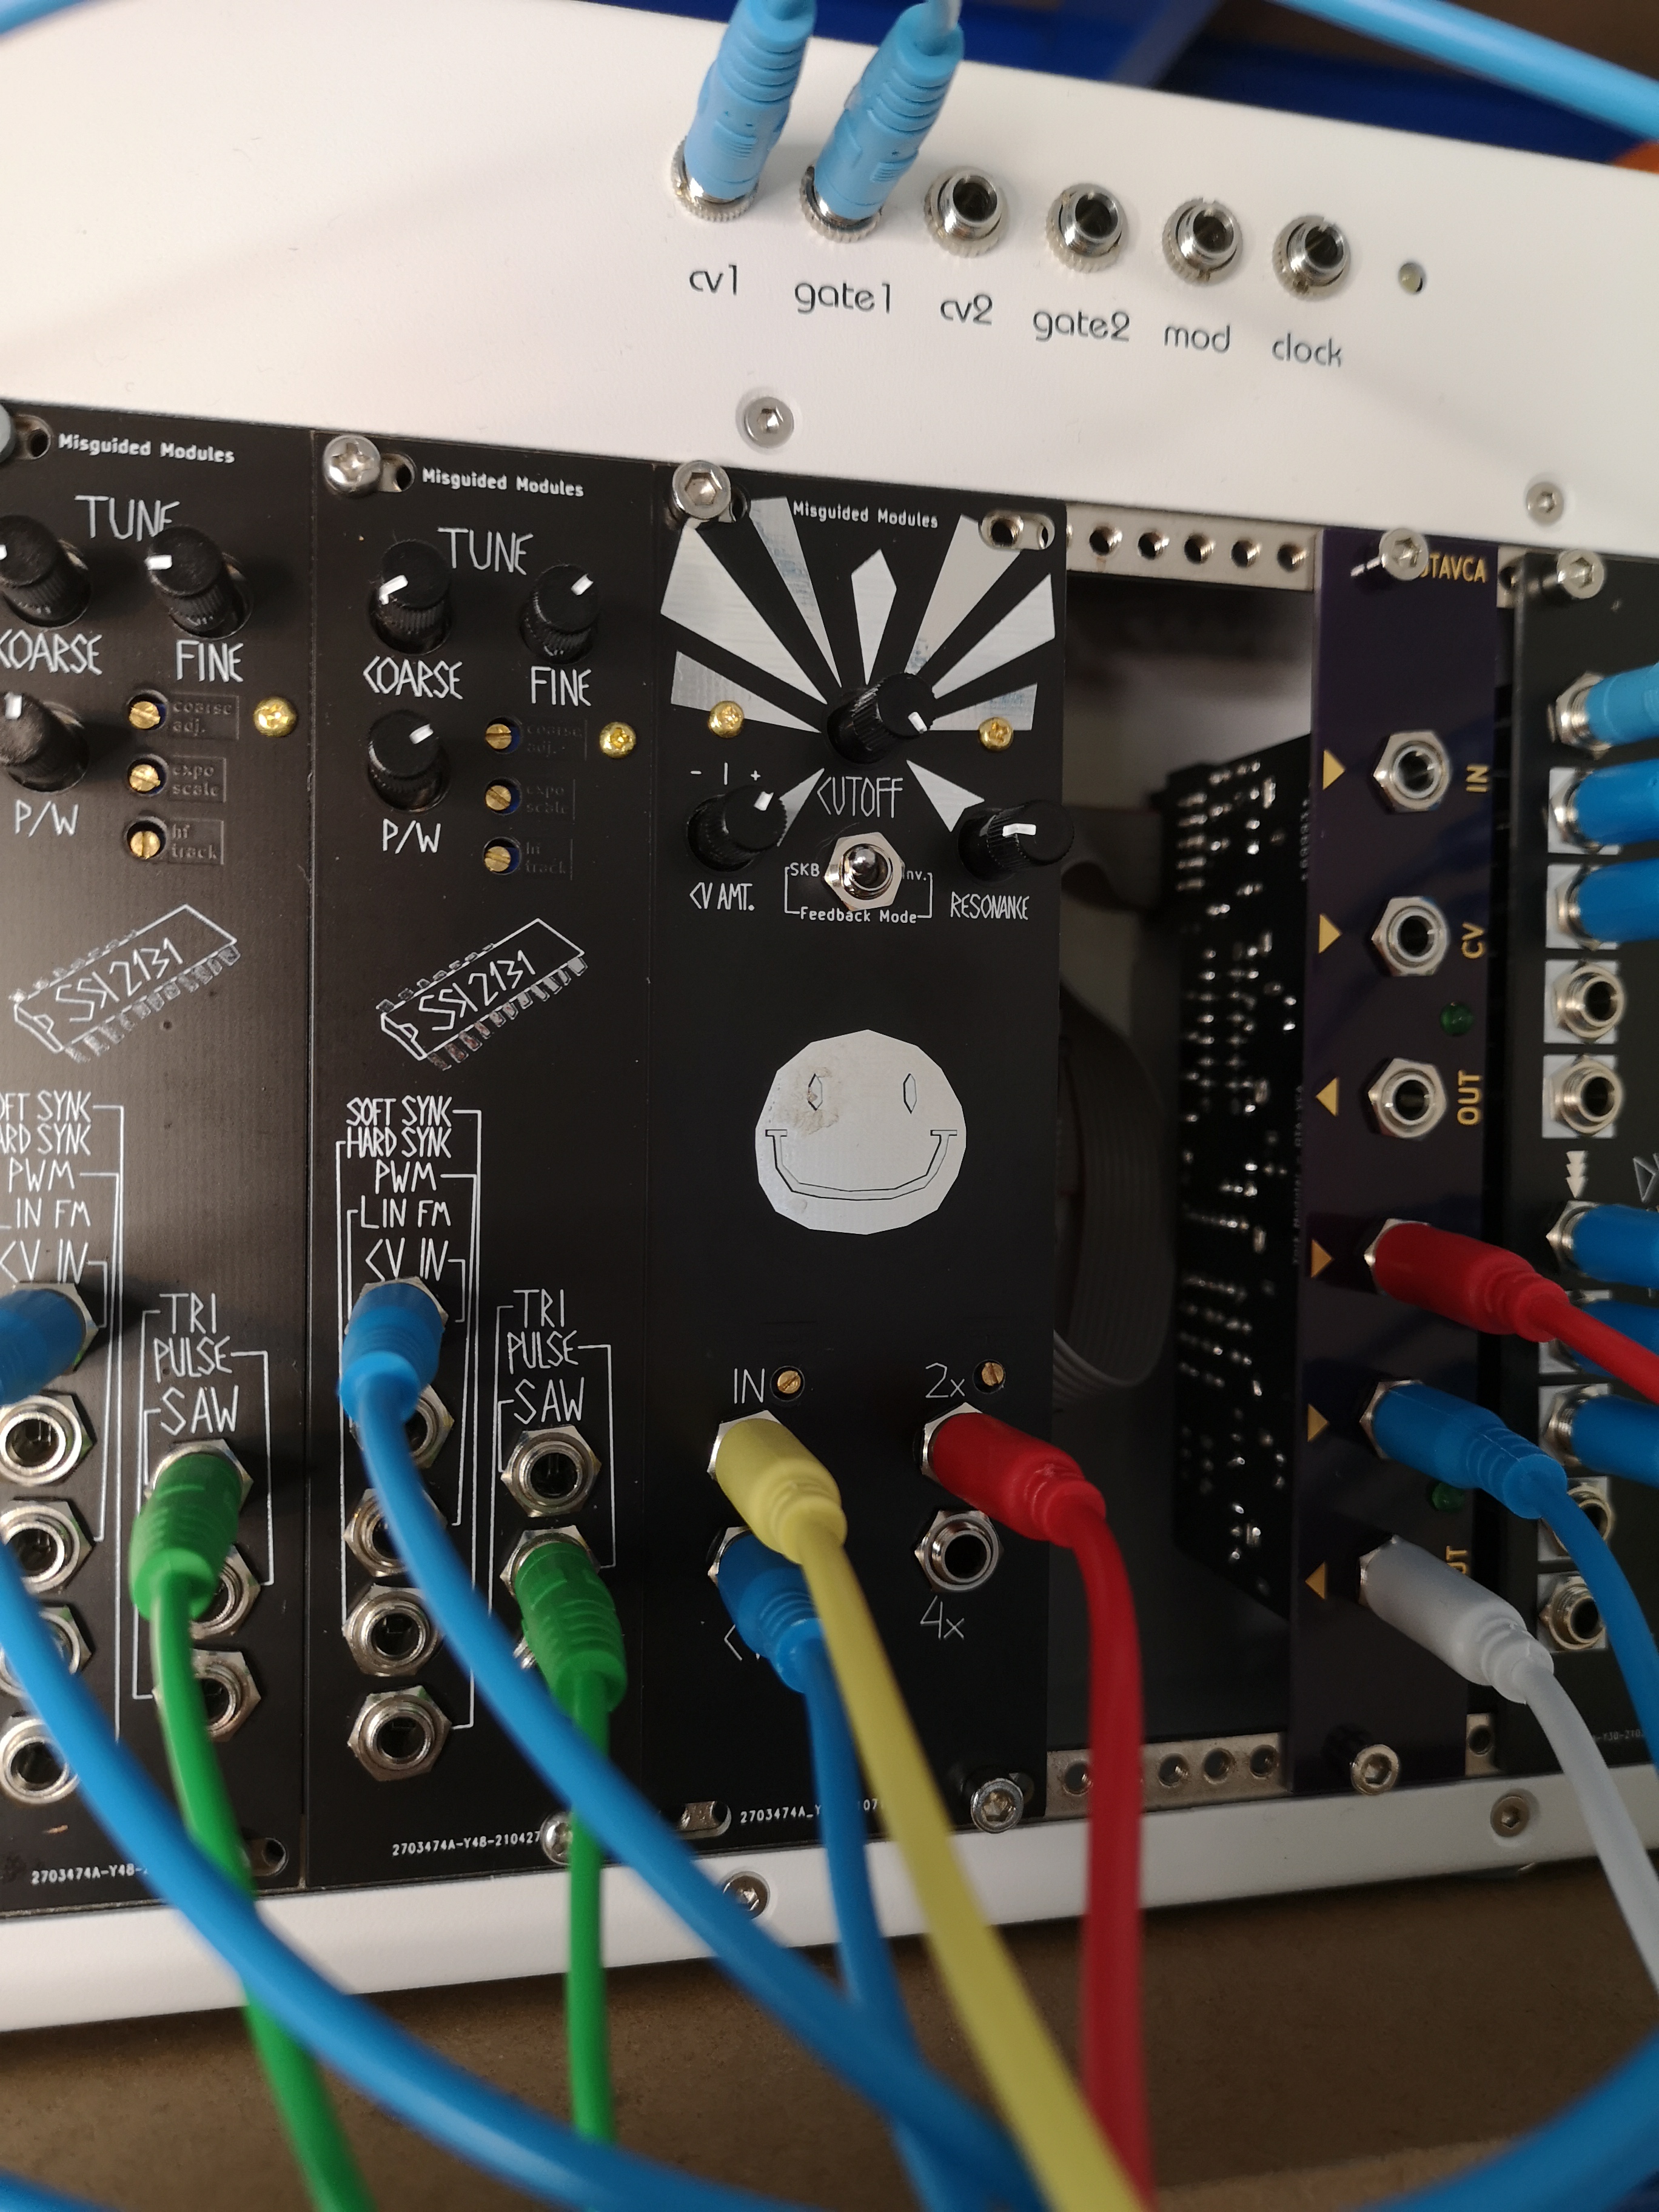 Mx JFET mounted in my modular system